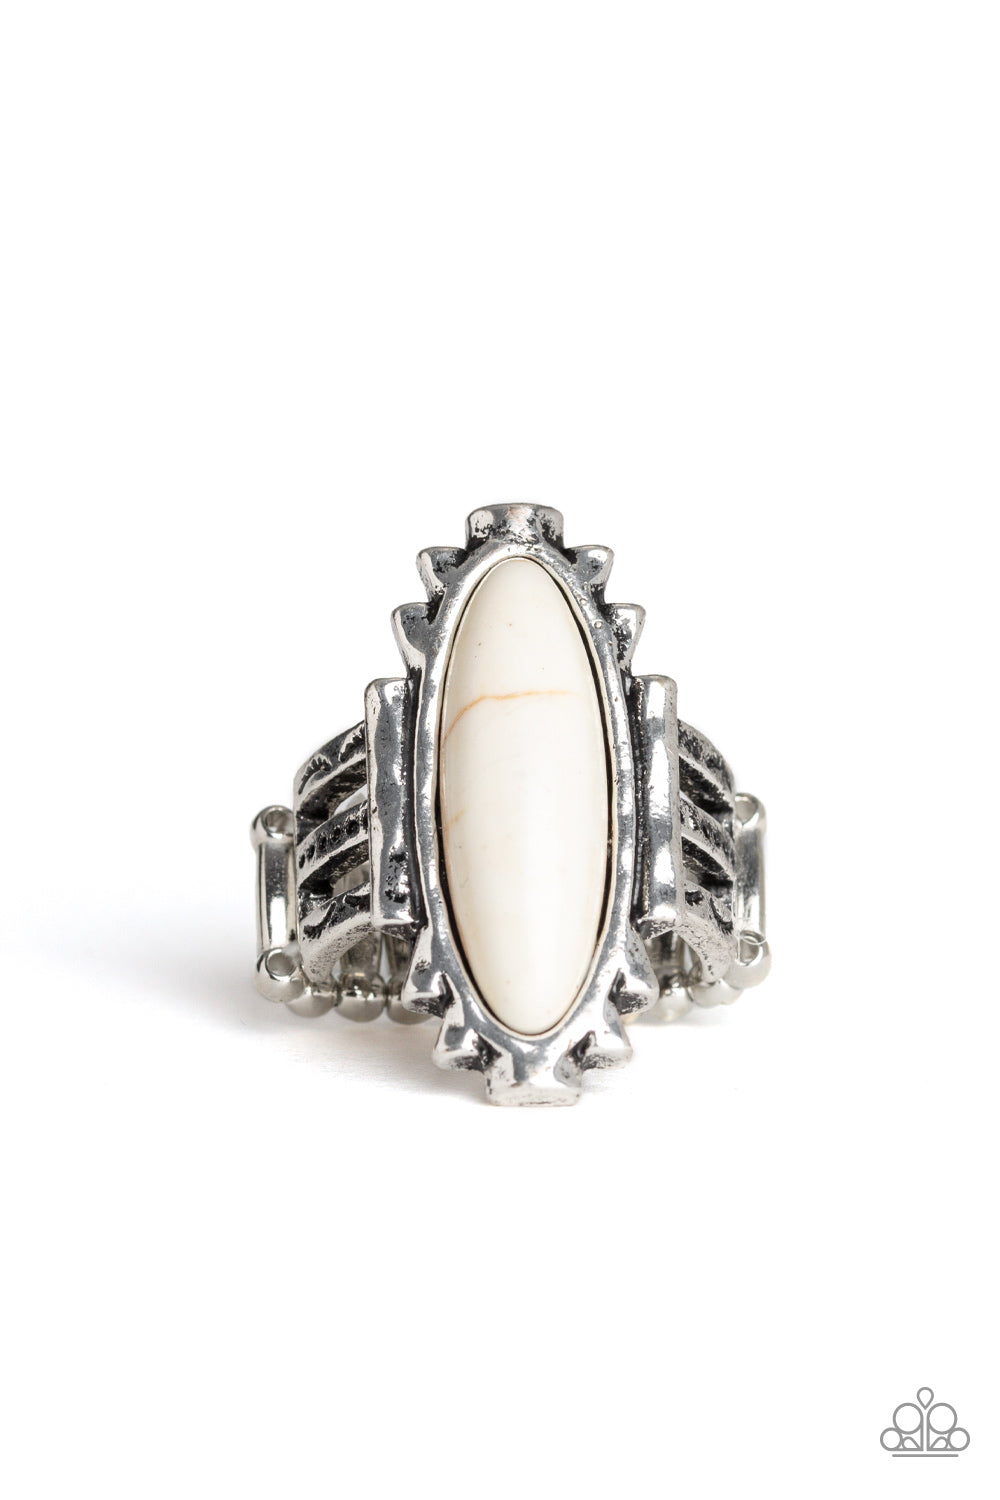 Paparazzi Accessories Canyon Calada - White Rings an oblong white stone is pressed into the center of a geometric silver frame featuring a hammered finish for a seasonal flair. Features a stretchy band for a flexible fit.